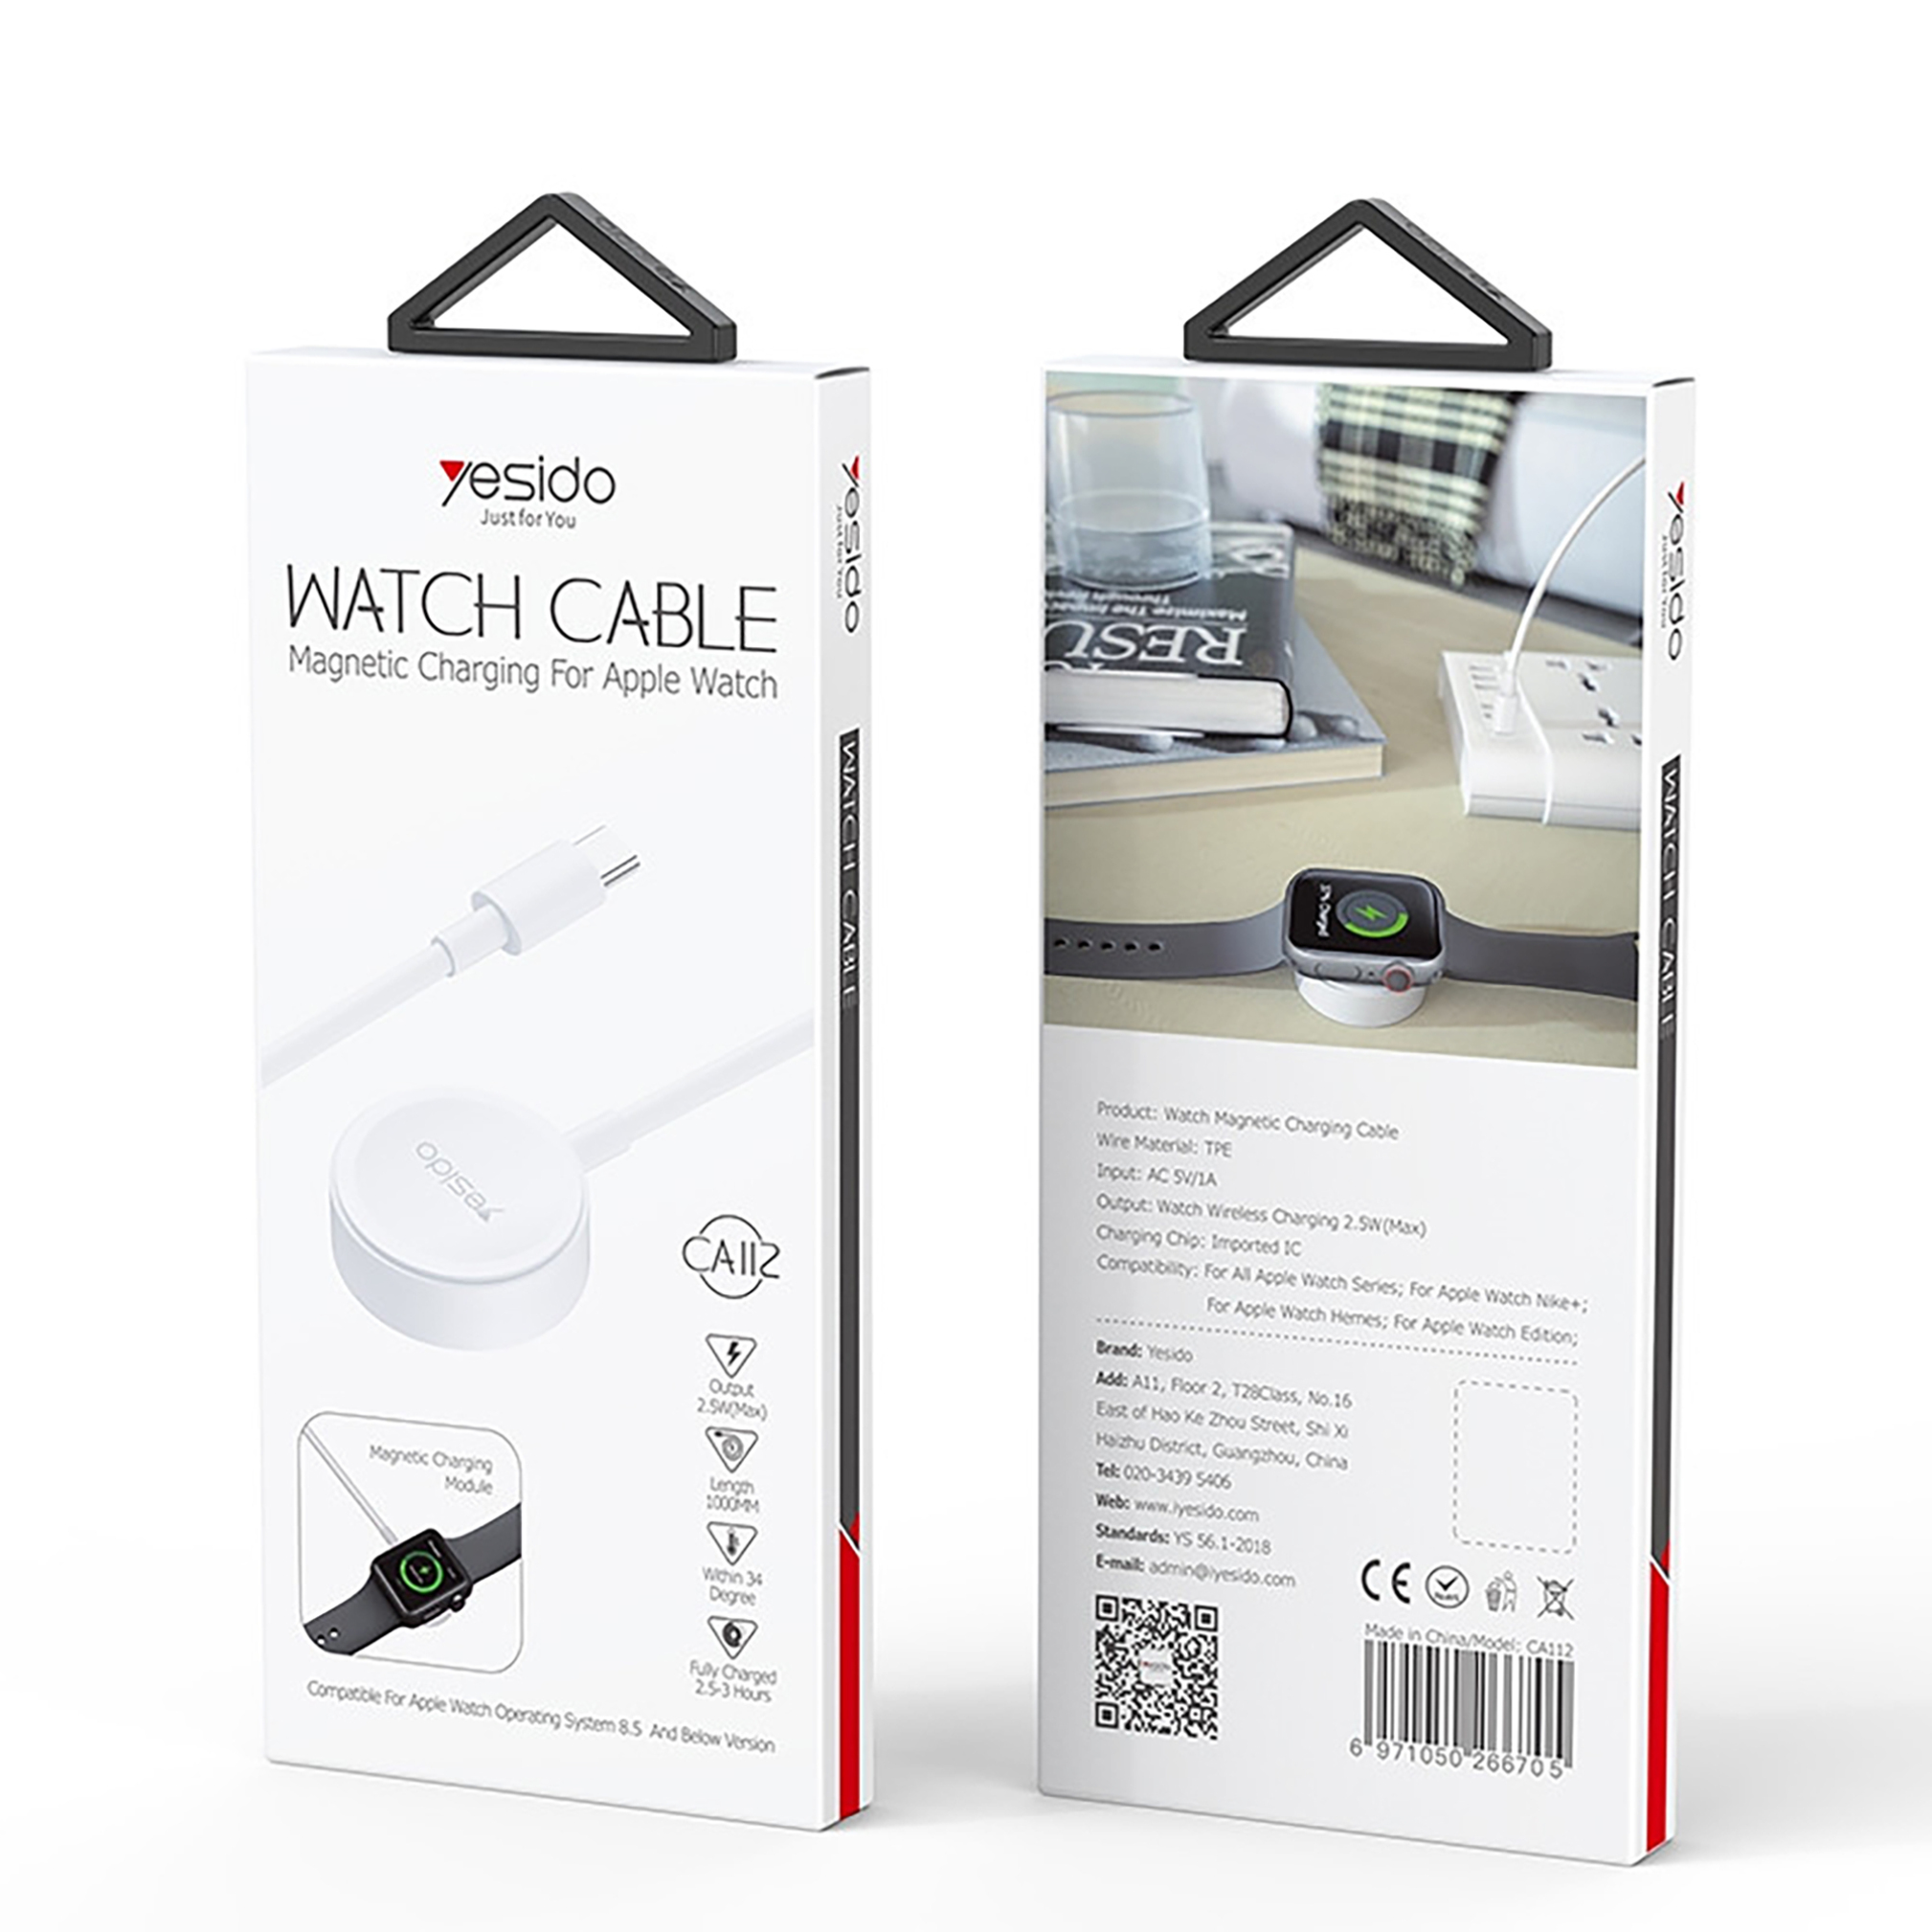  Yesido-CA112-magnetic-charging-cable 